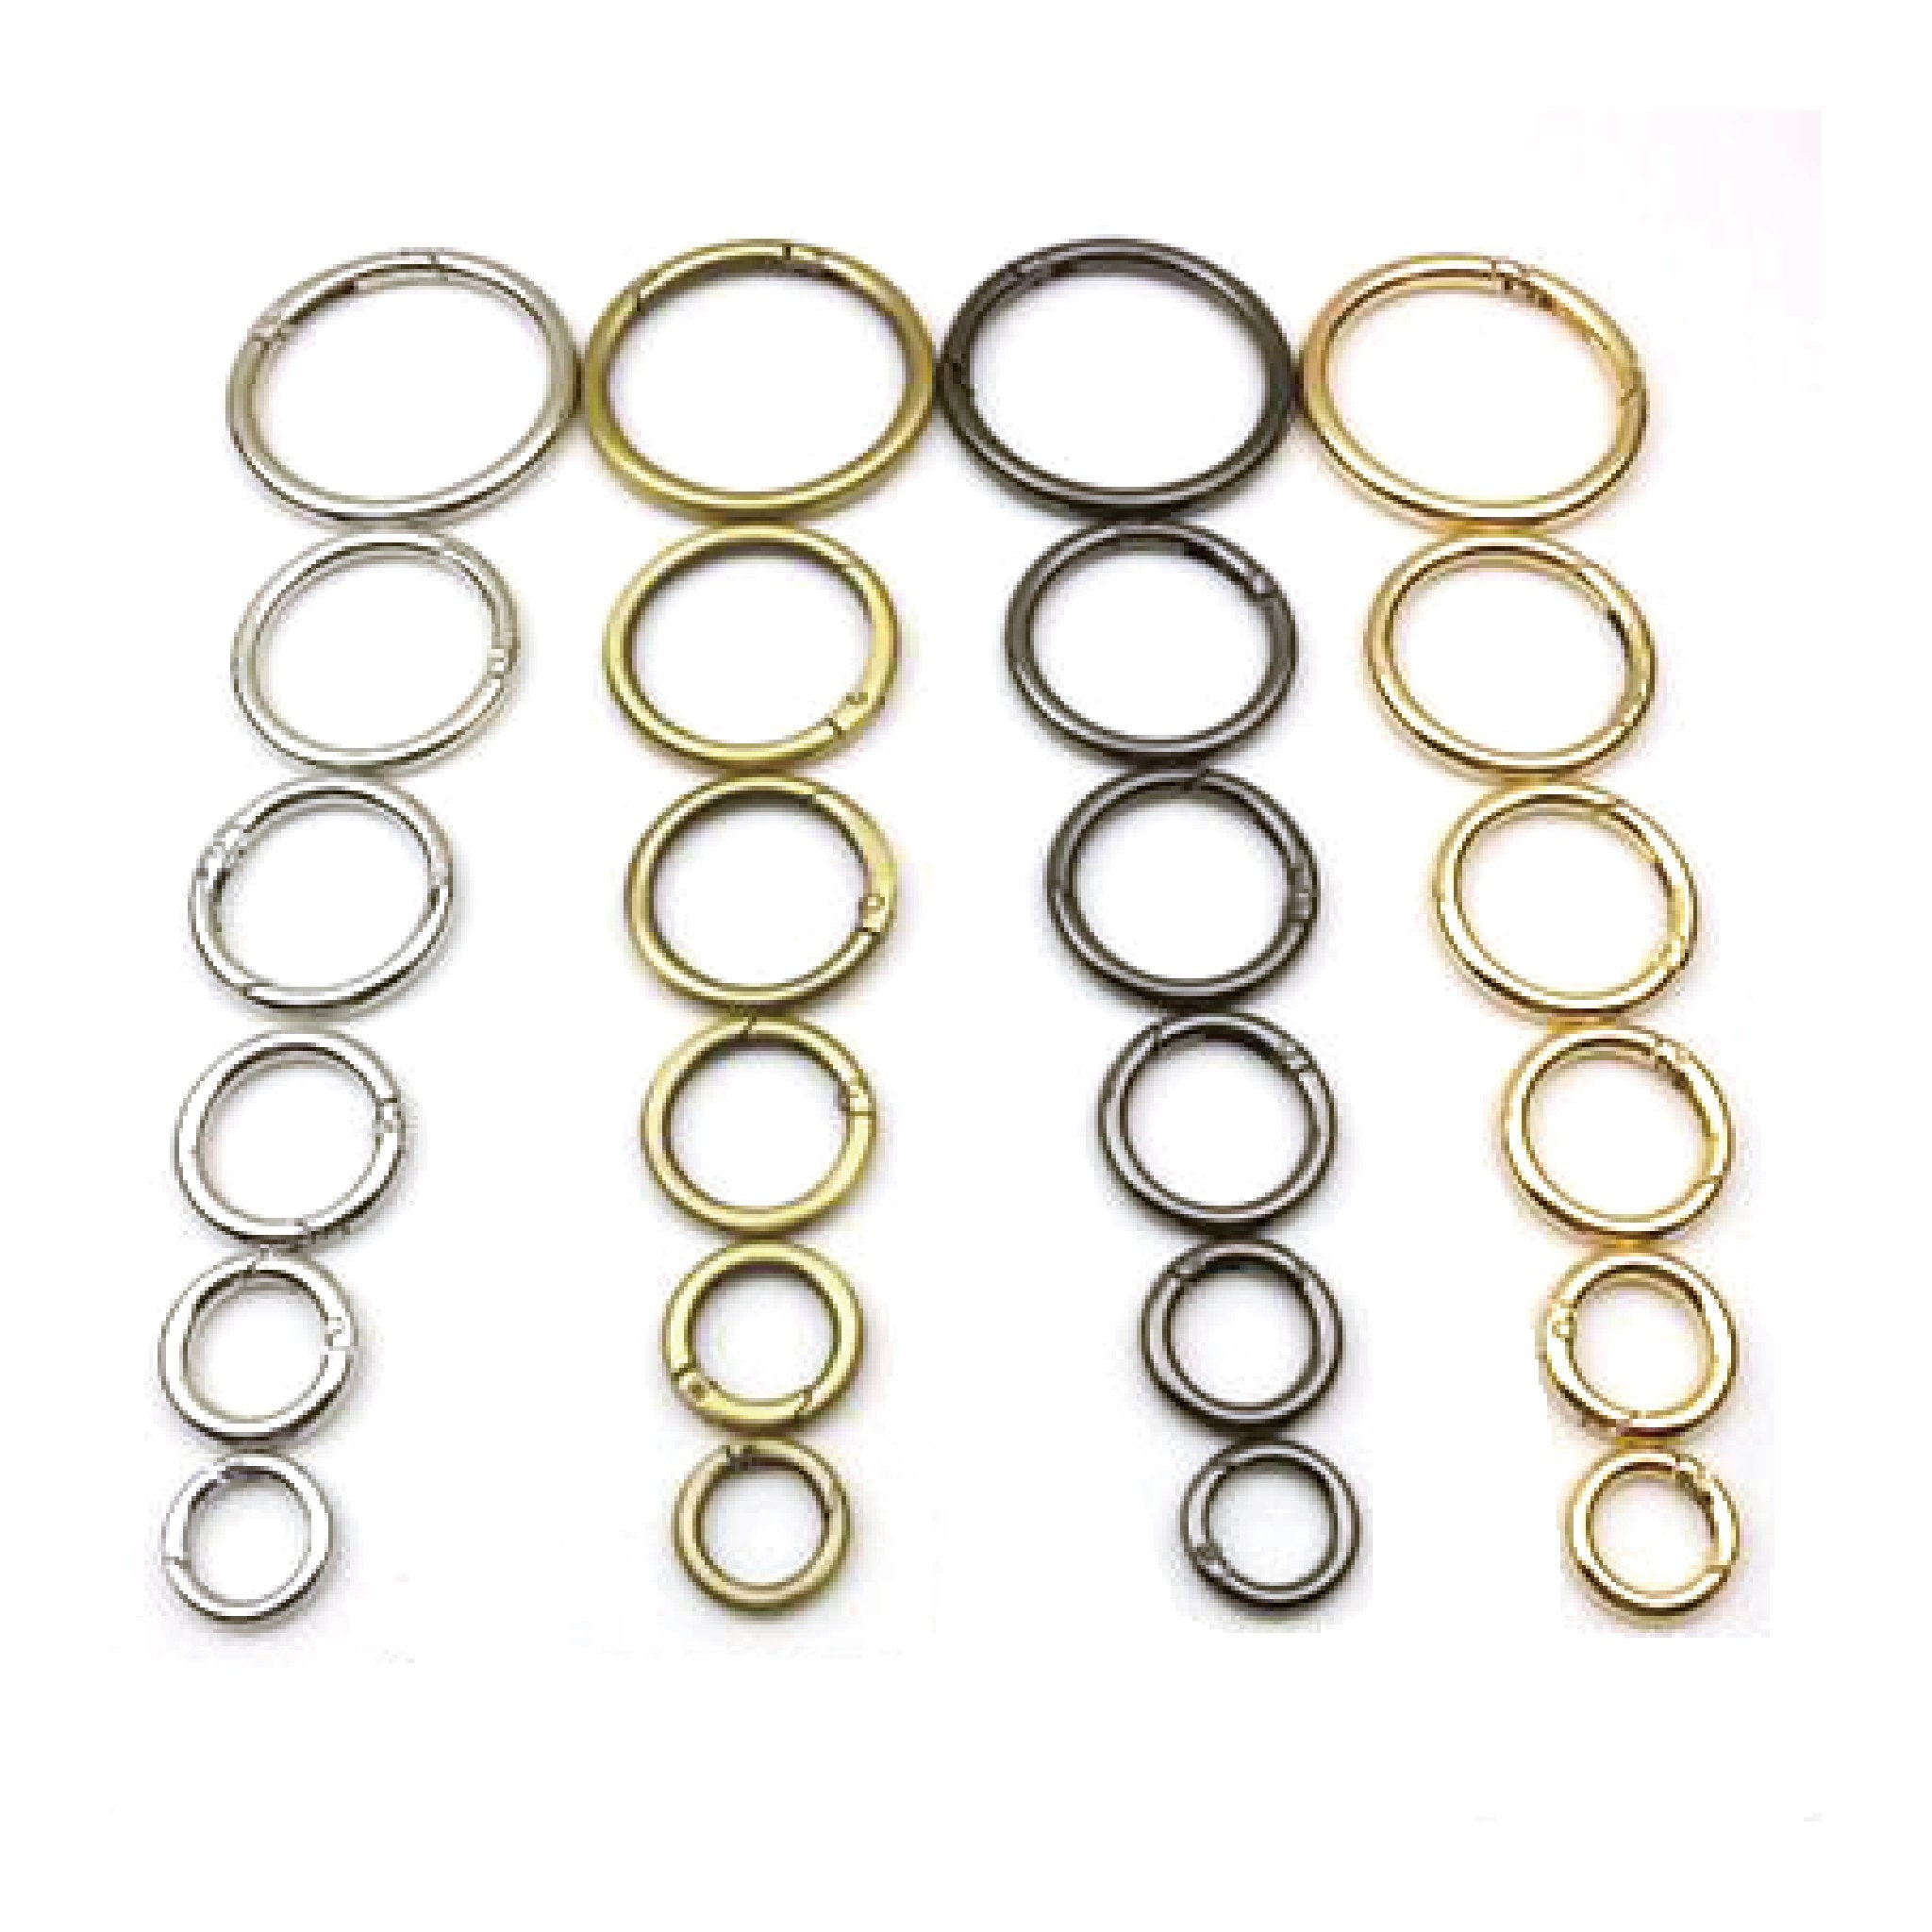 12 inch Gold Metal Rings Hoops for Crafts Bulk Wholesale 5 Pieces